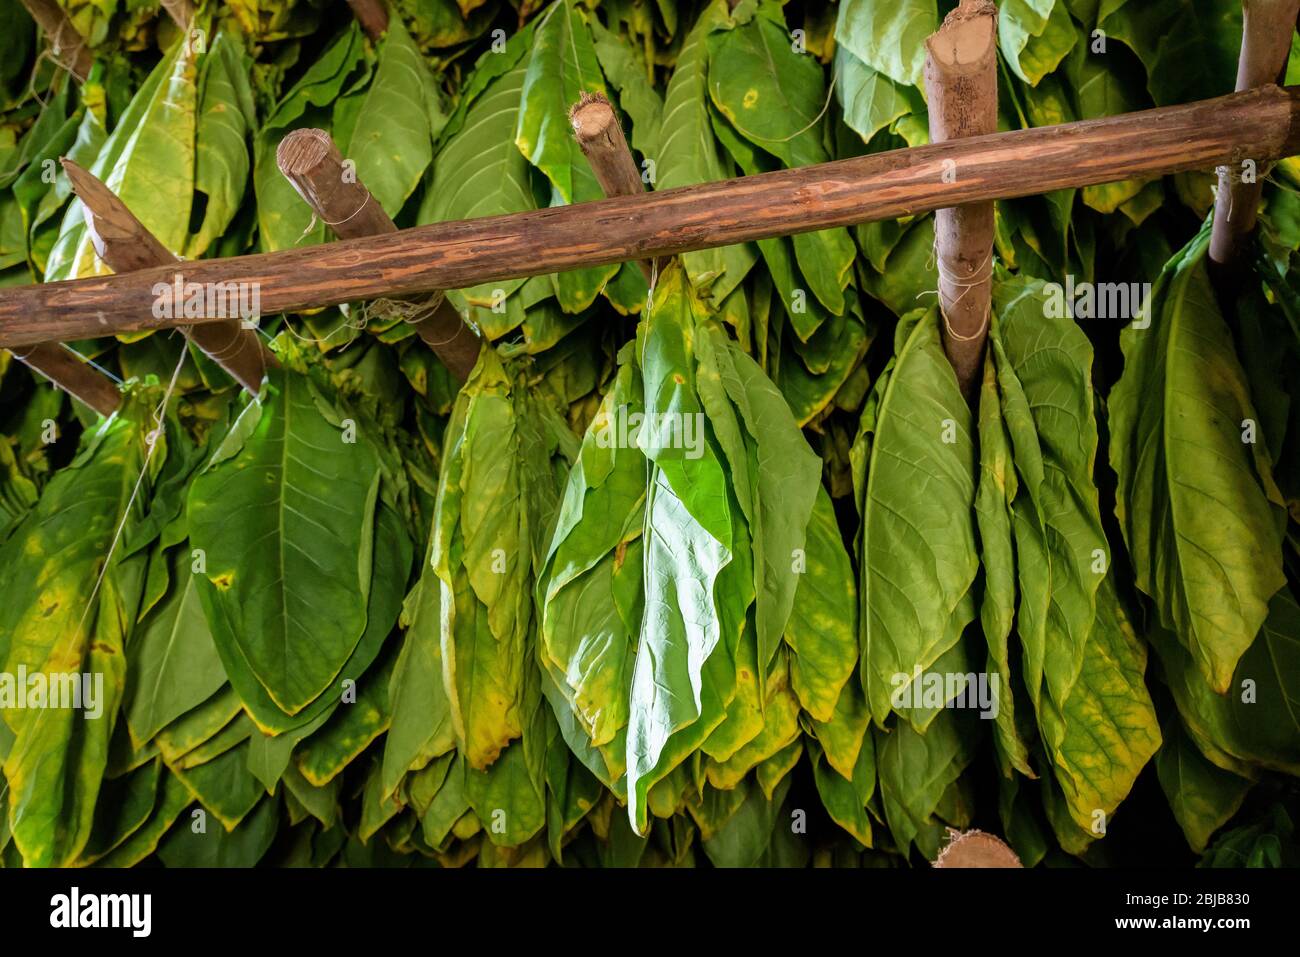 Classical way of drying tobacco leaves, hanging in a dark humid shed in a farm in Vinales Valley, Pinar del Rio, Cuba Stock Photo